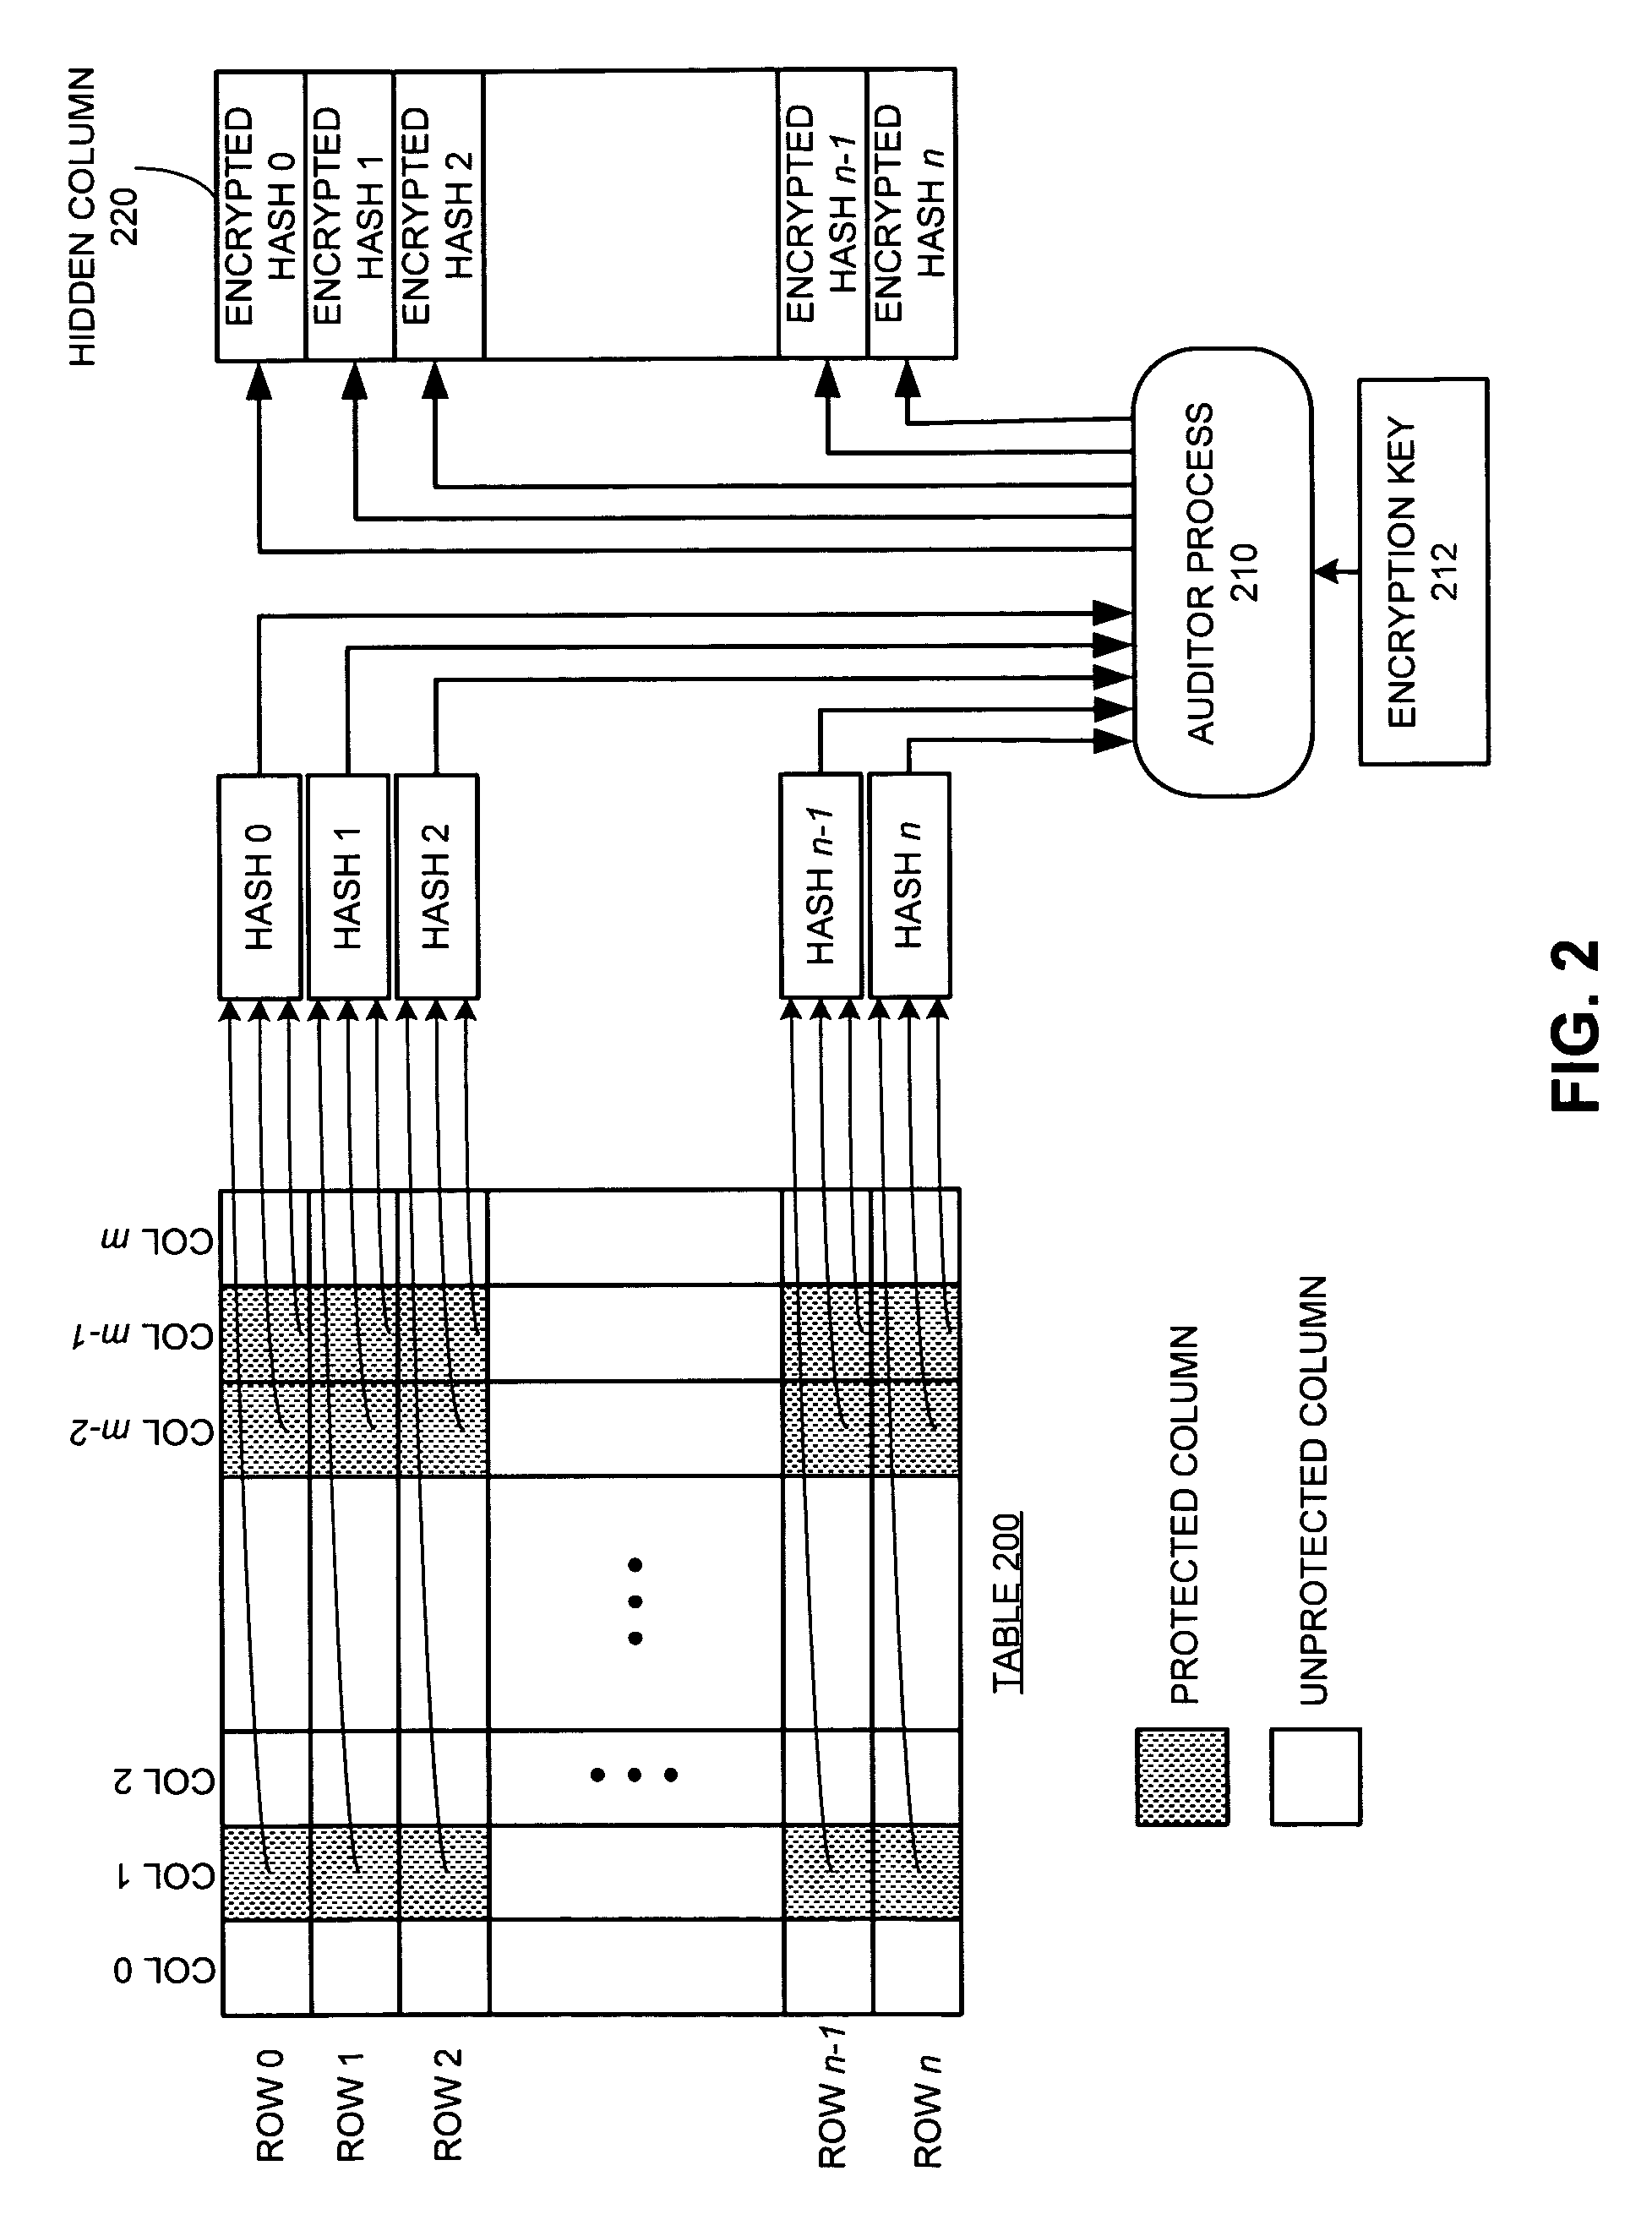 Method and apparatus for protecting data from unauthorized modification